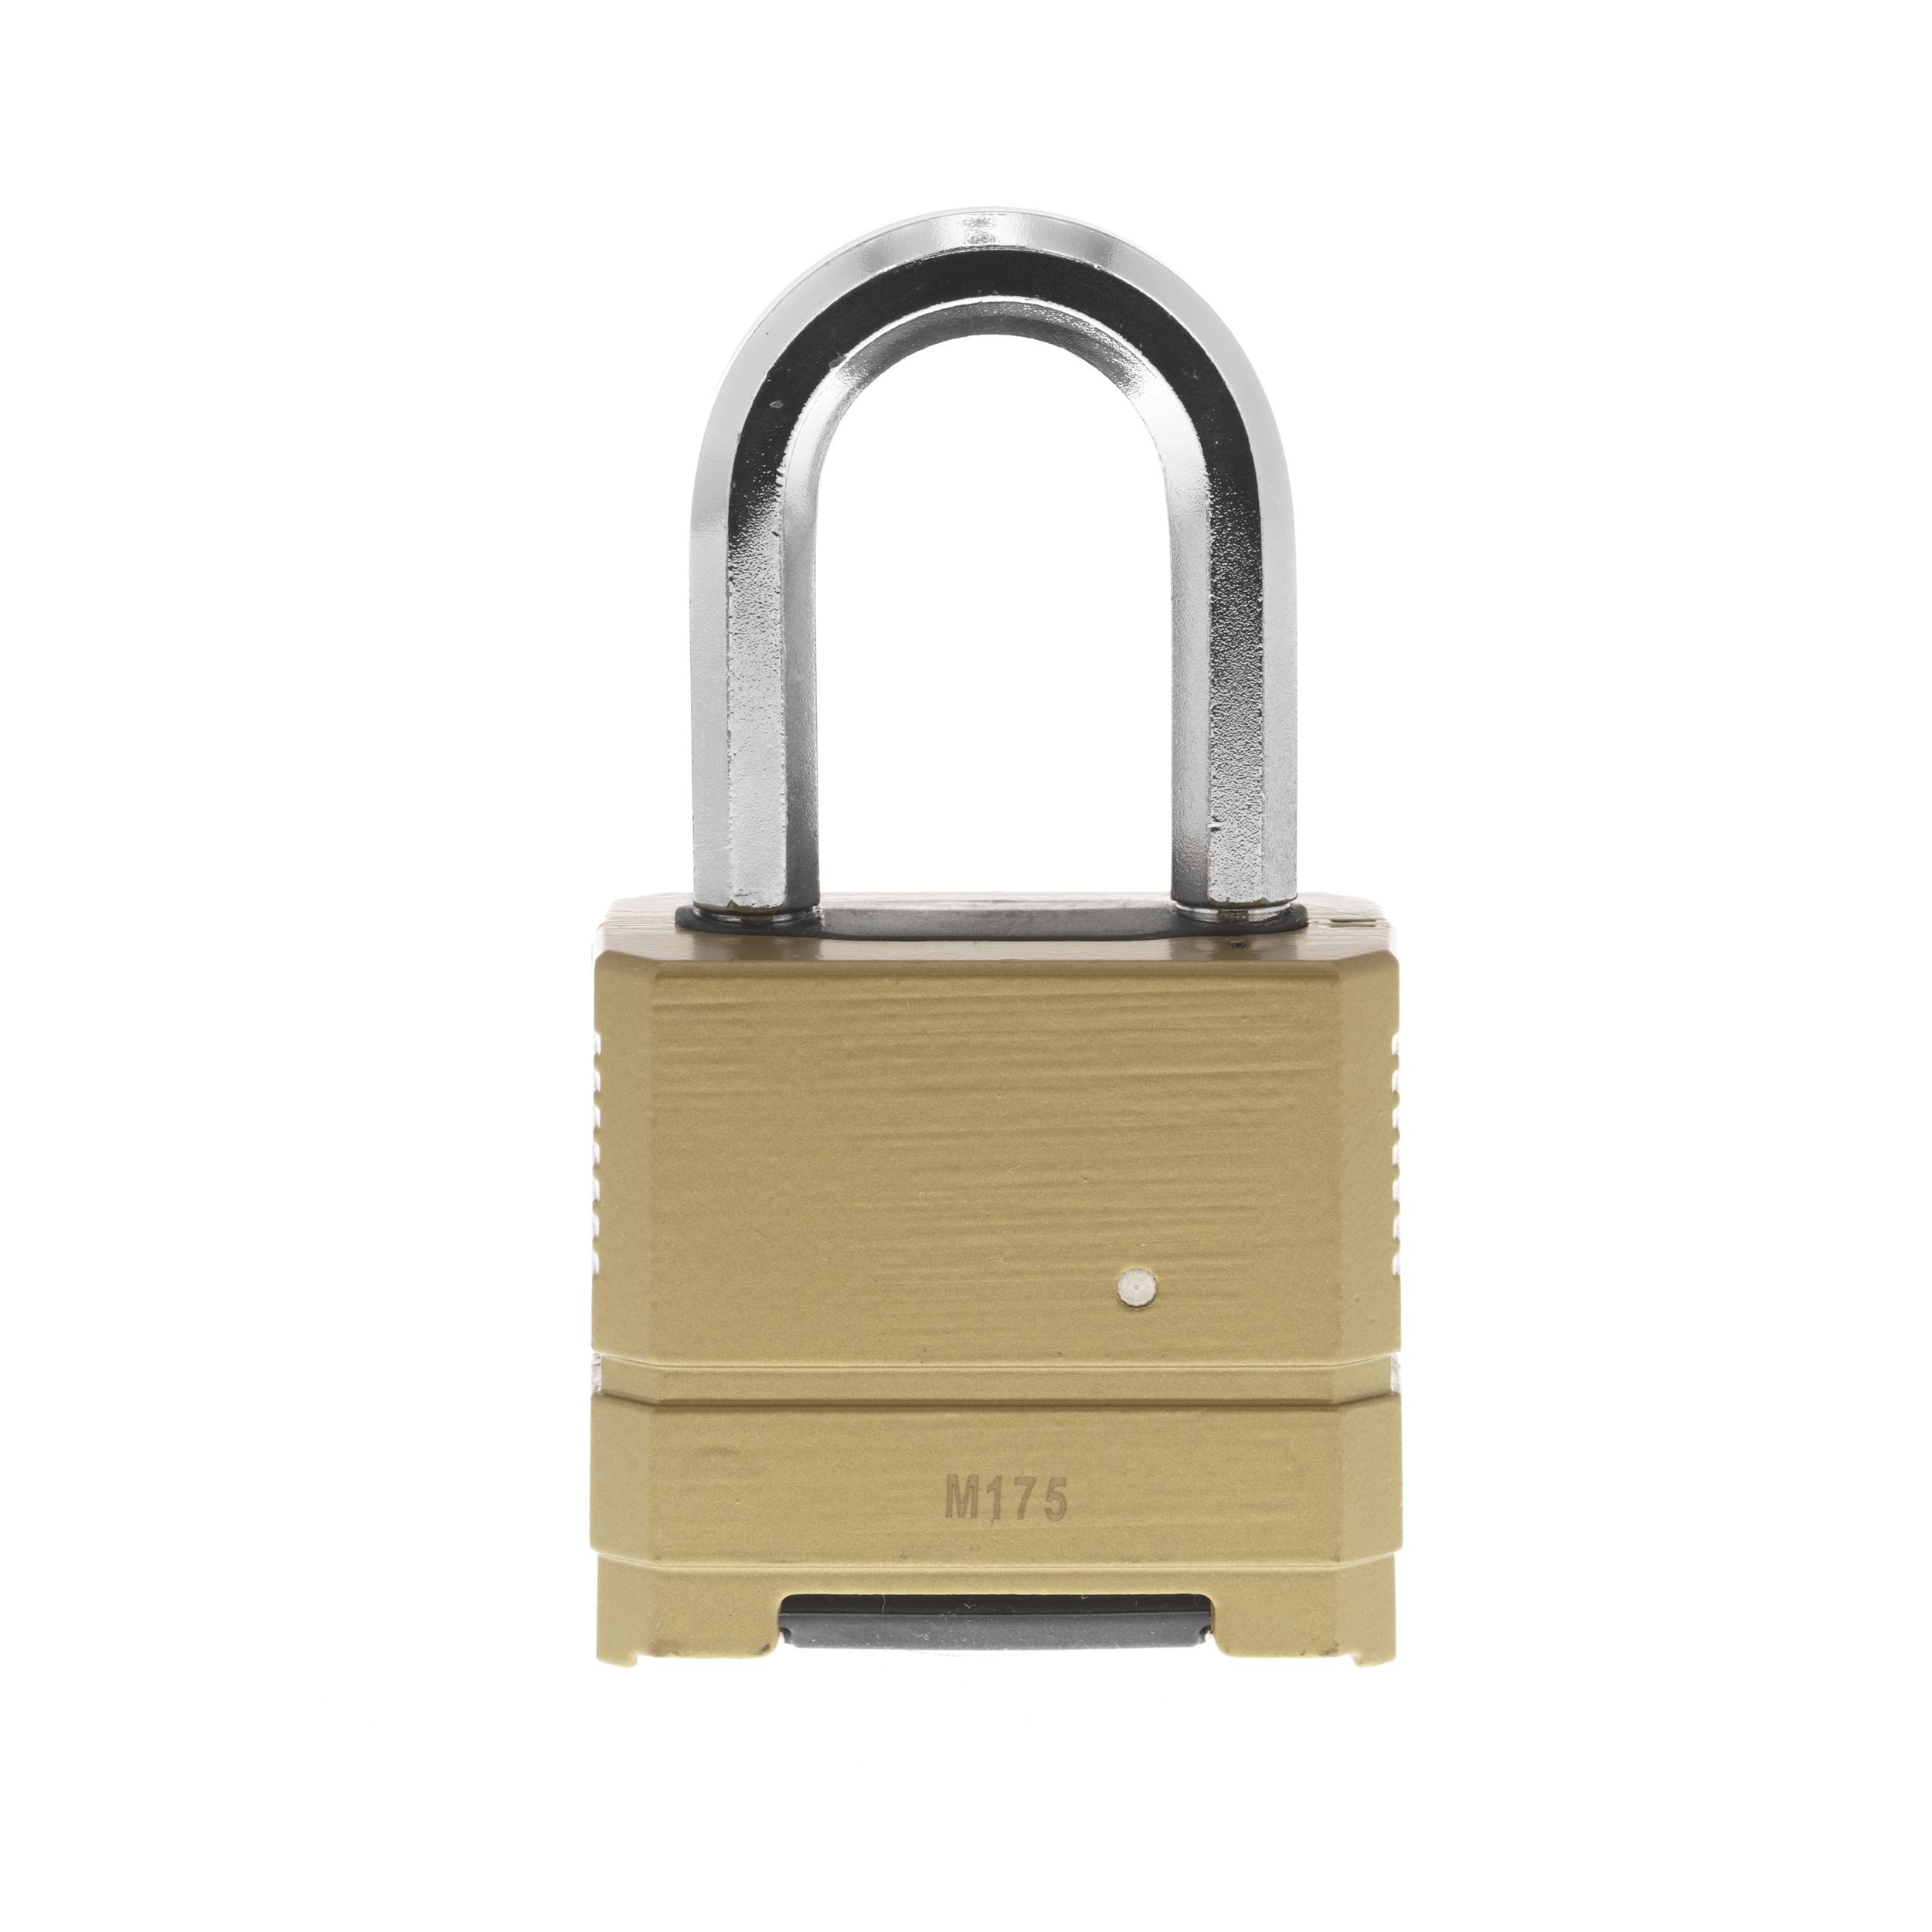 Master Lock Outdoor Padlock with Key, 1-1/8 in. Wide 7KADCC - The